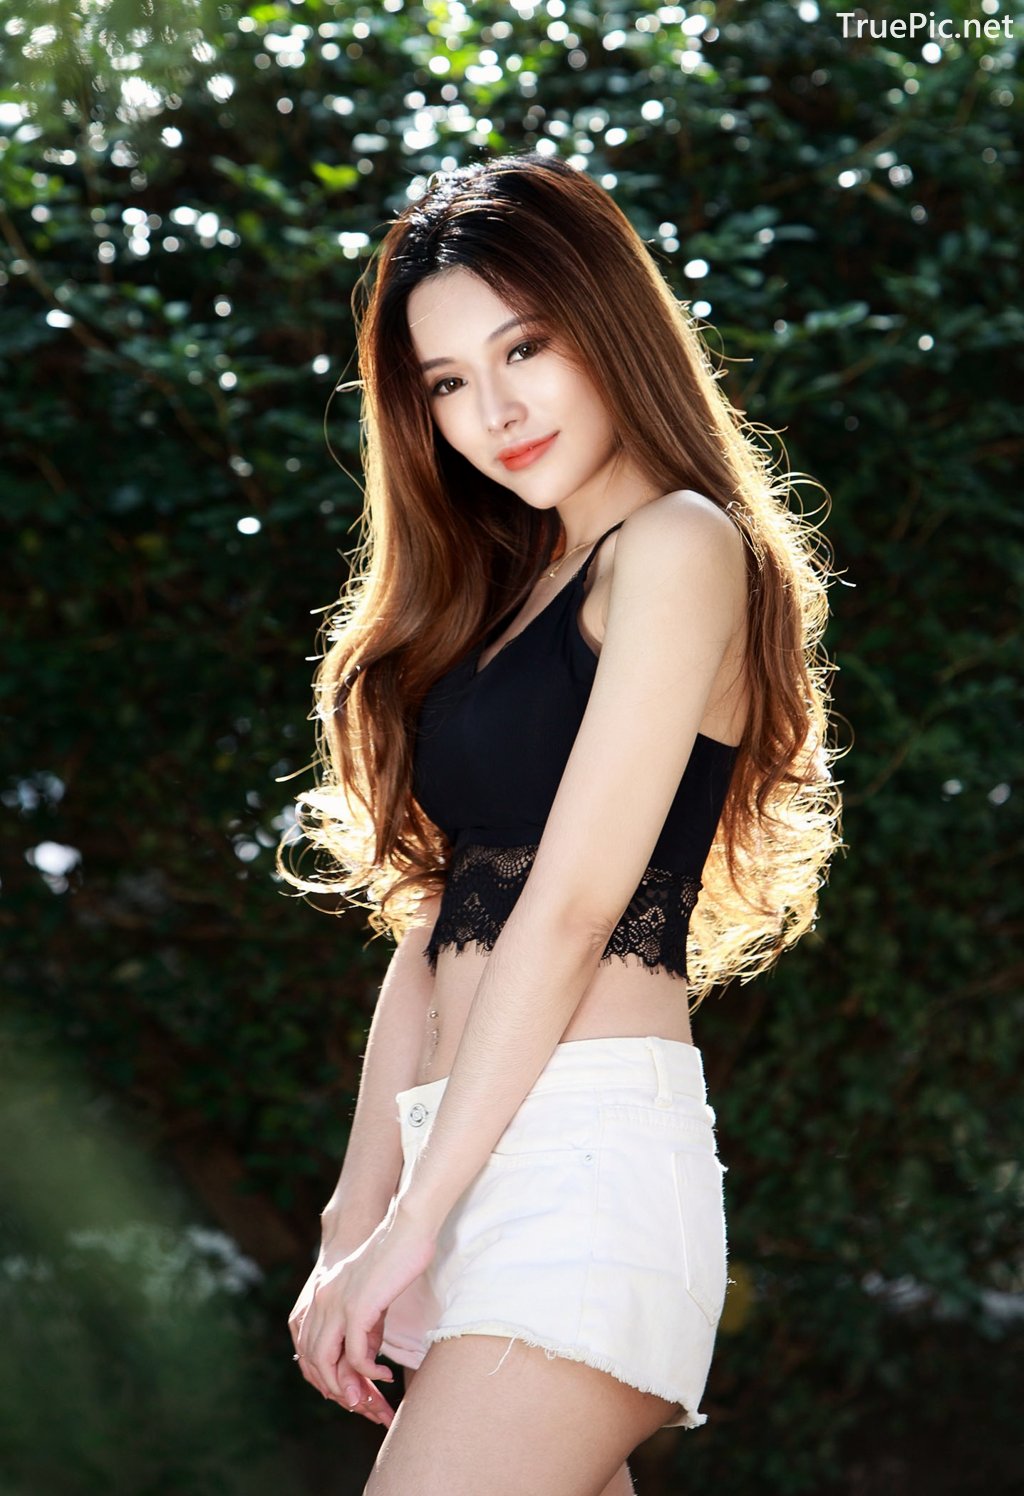 Image-Taiwanese-Model–莊舒潔–Hot-White-Short-Pants-and-Black-Crop-Top-TruePic.net- Picture-46